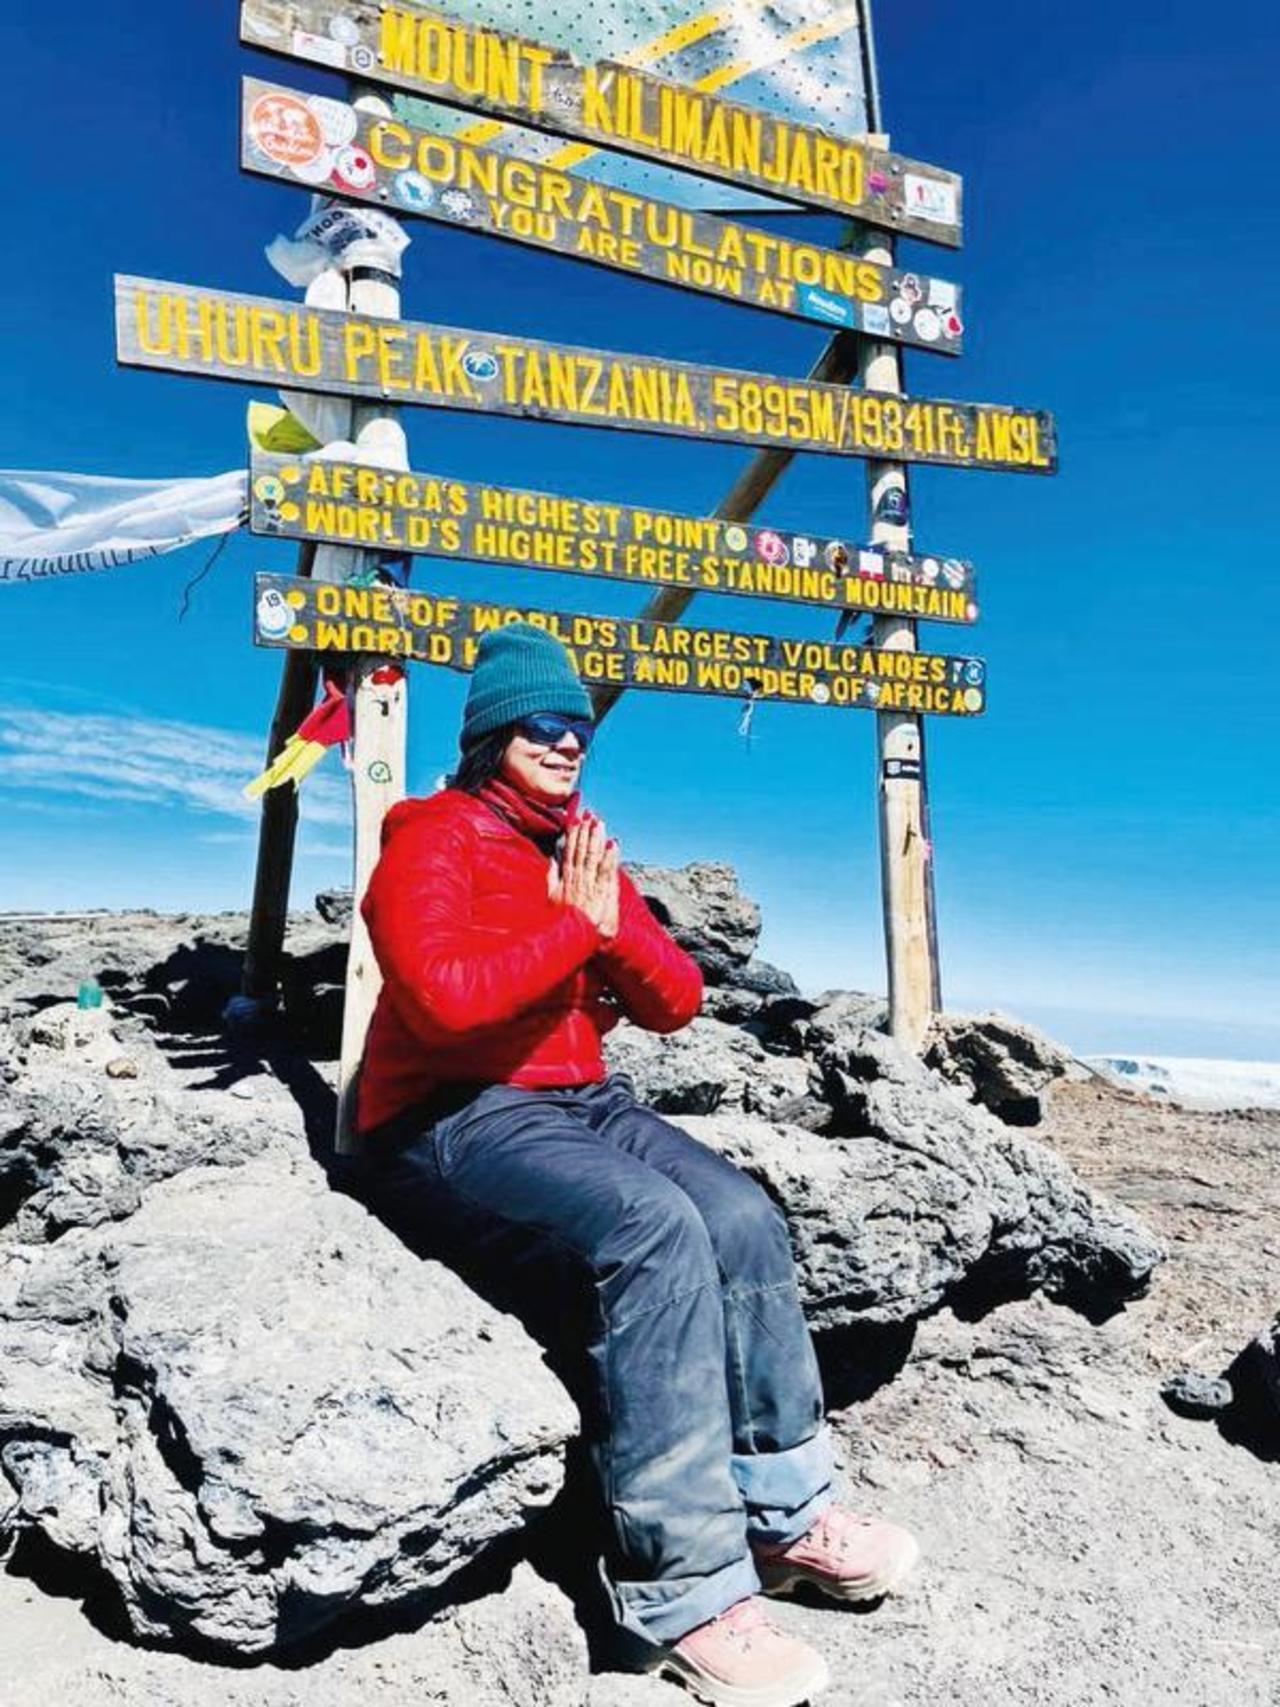 Top-notch: Woman hailing from scales Mt Kilimanjaro, says 'for her father and daughters' Nagpur News - India